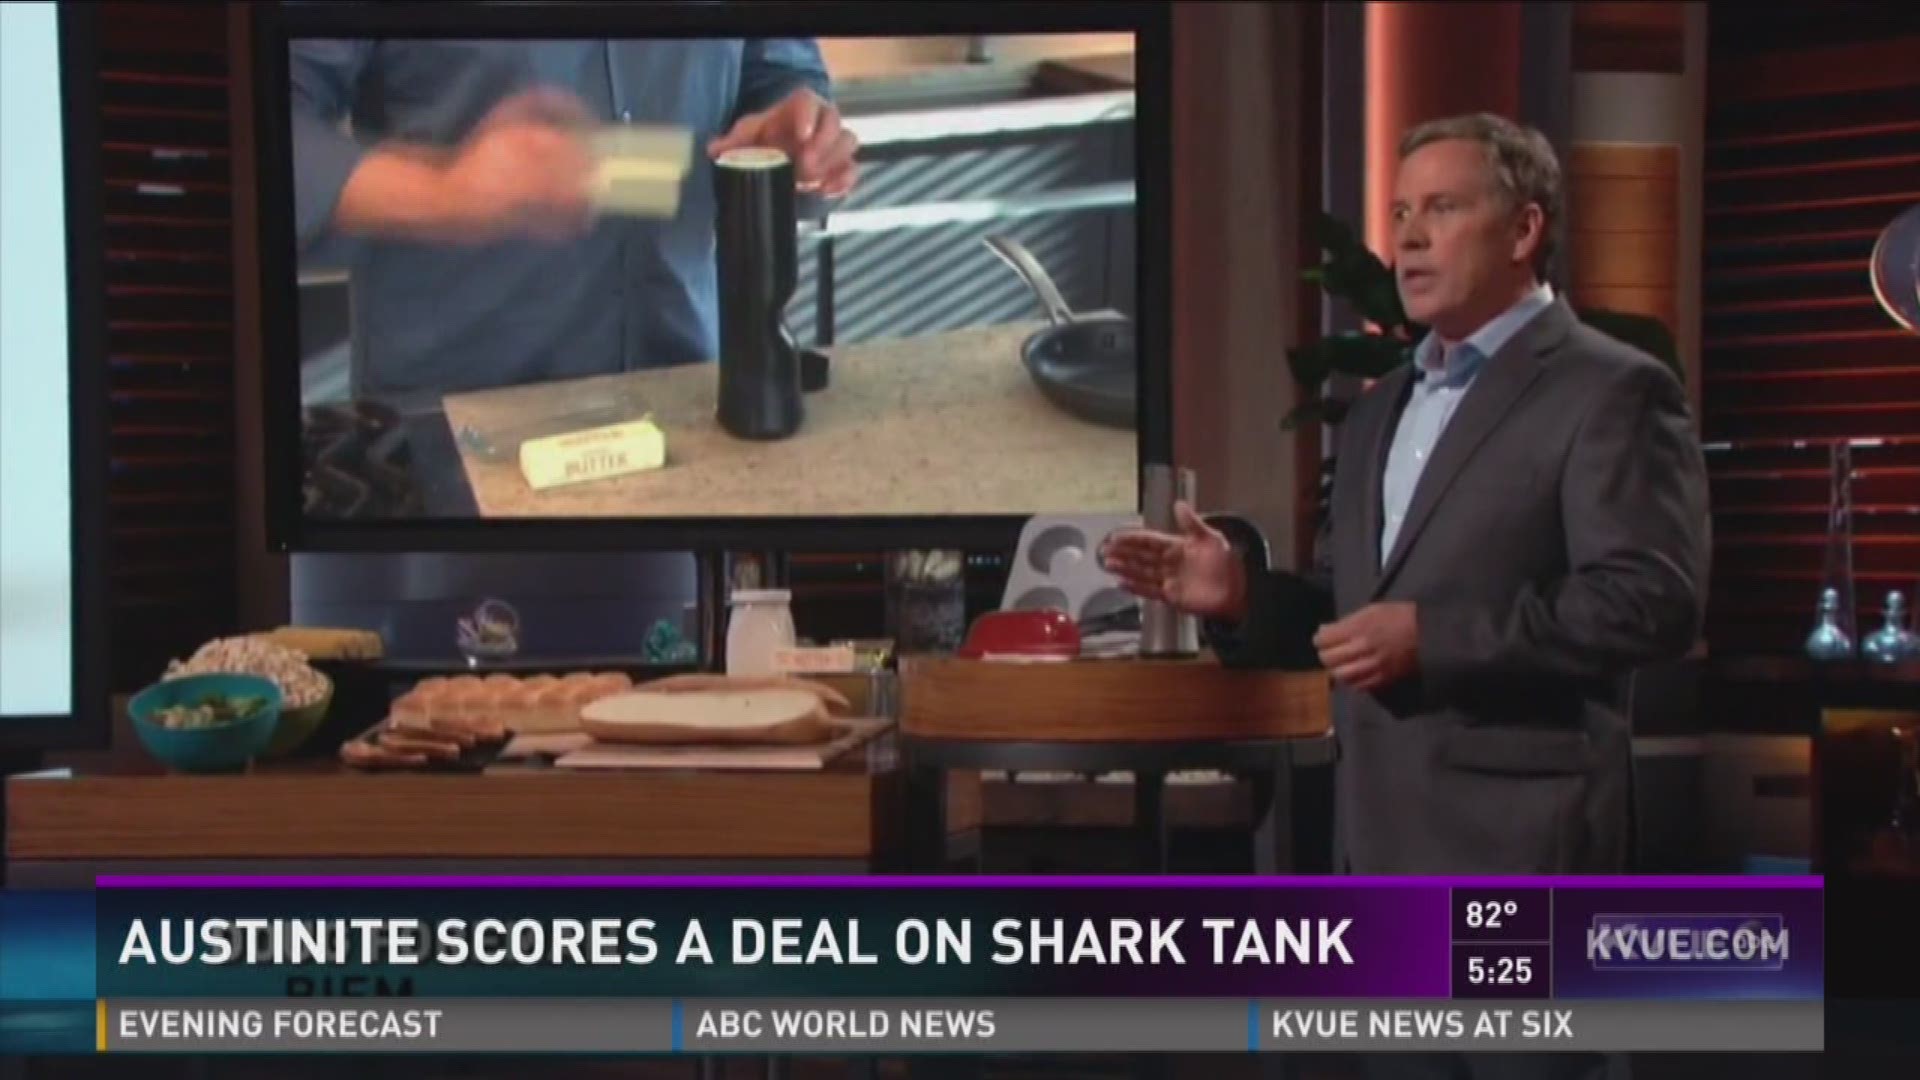 Doug Foreman was featured on ABC's 'Shark Tank' pitching his product Biem.